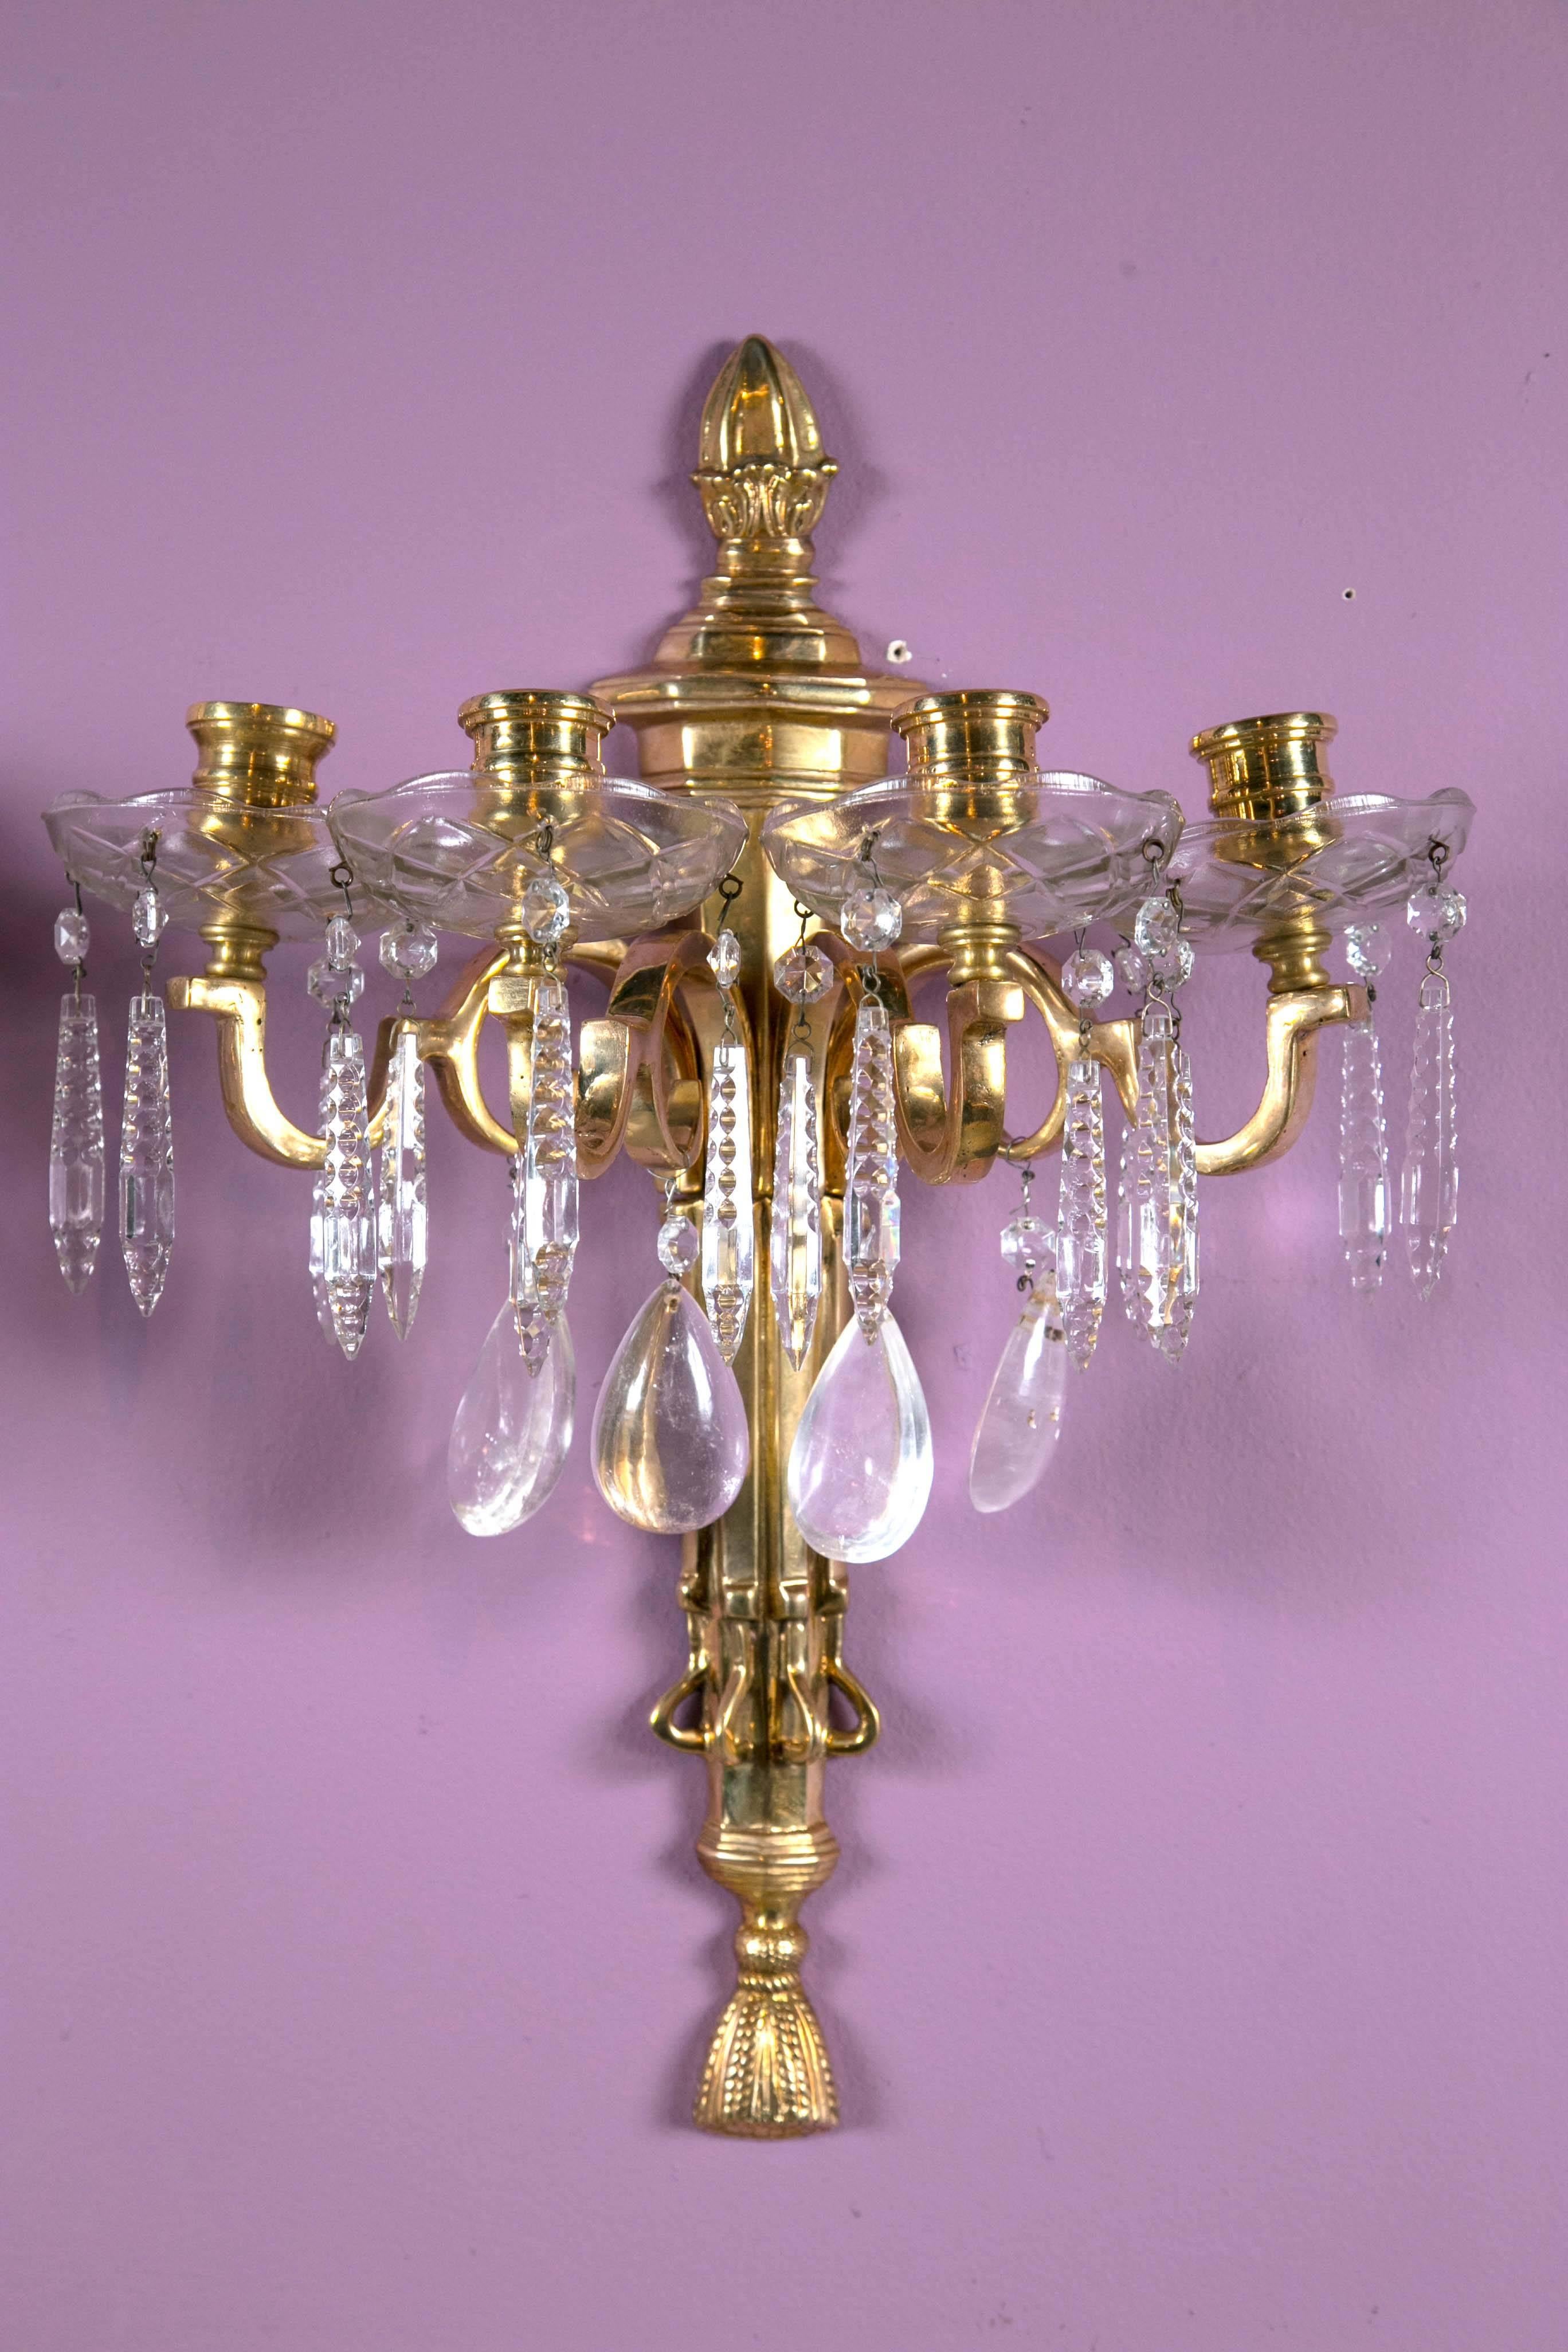 Lovely pair of Caldwell sconces gilt bronze with rock crystal drops.
Four pair available. Priced per pair.